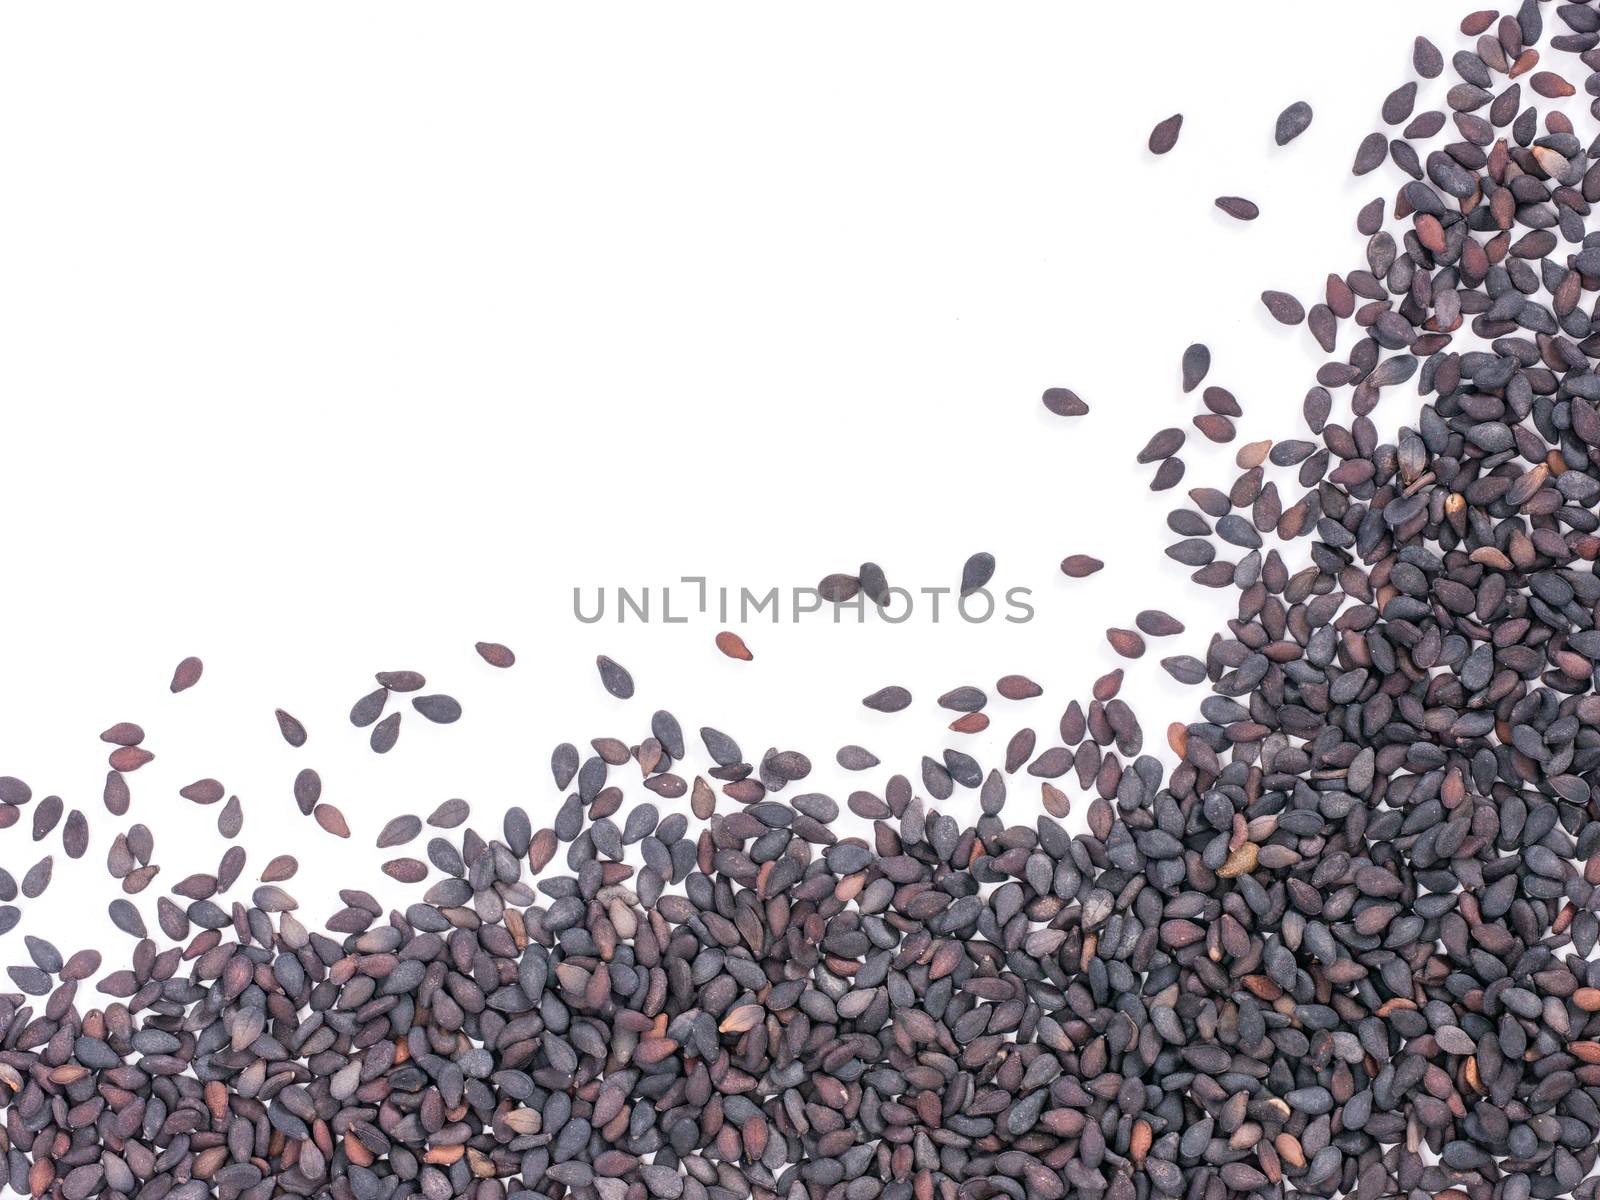 Black sesame on white background with copy space. Isolated one edge. Top view or flat lay.